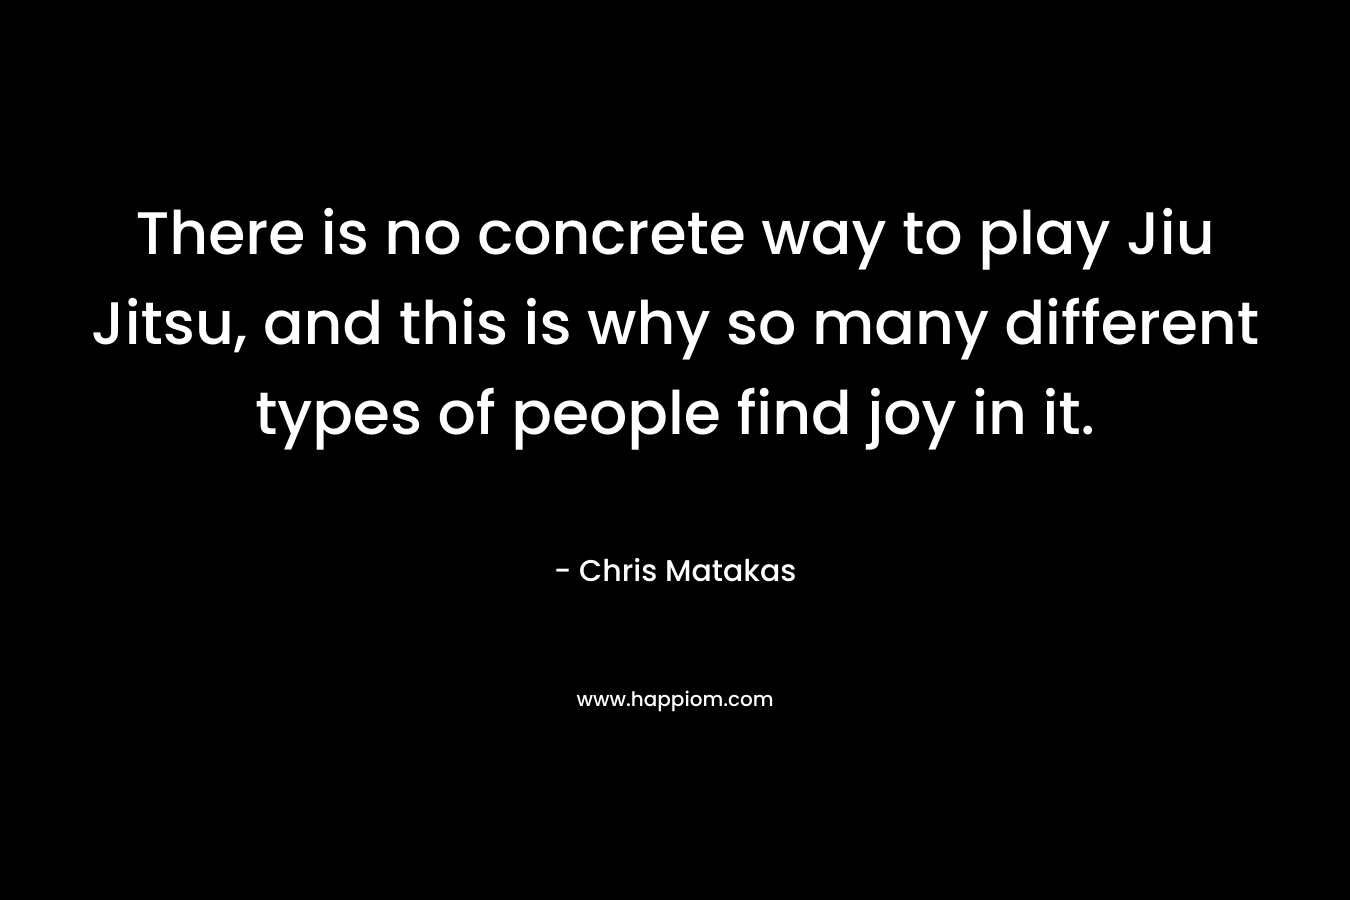 There is no concrete way to play Jiu Jitsu, and this is why so many different types of people find joy in it. – Chris Matakas